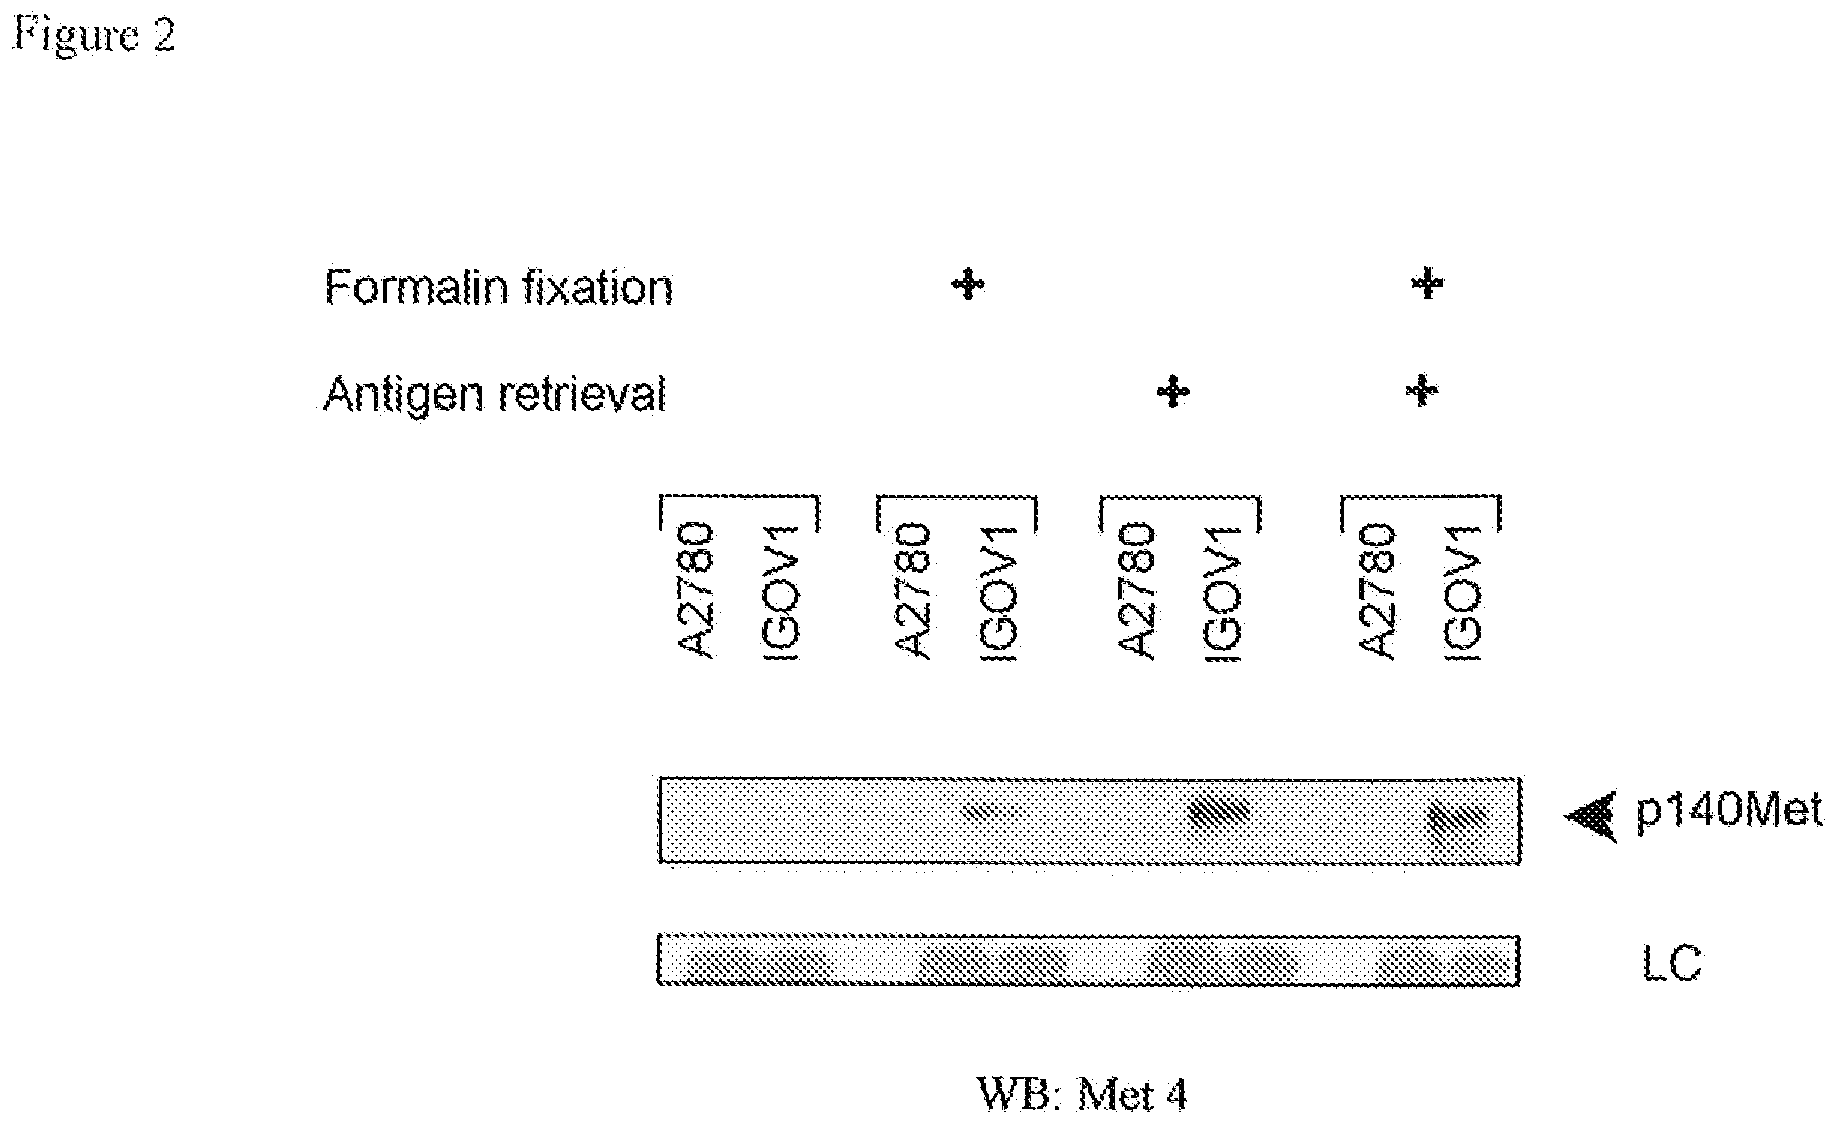 Monoclonal antibody which binds cMet (HGFR) in formalin-fixed and paraffin-embedded tissues and related methods